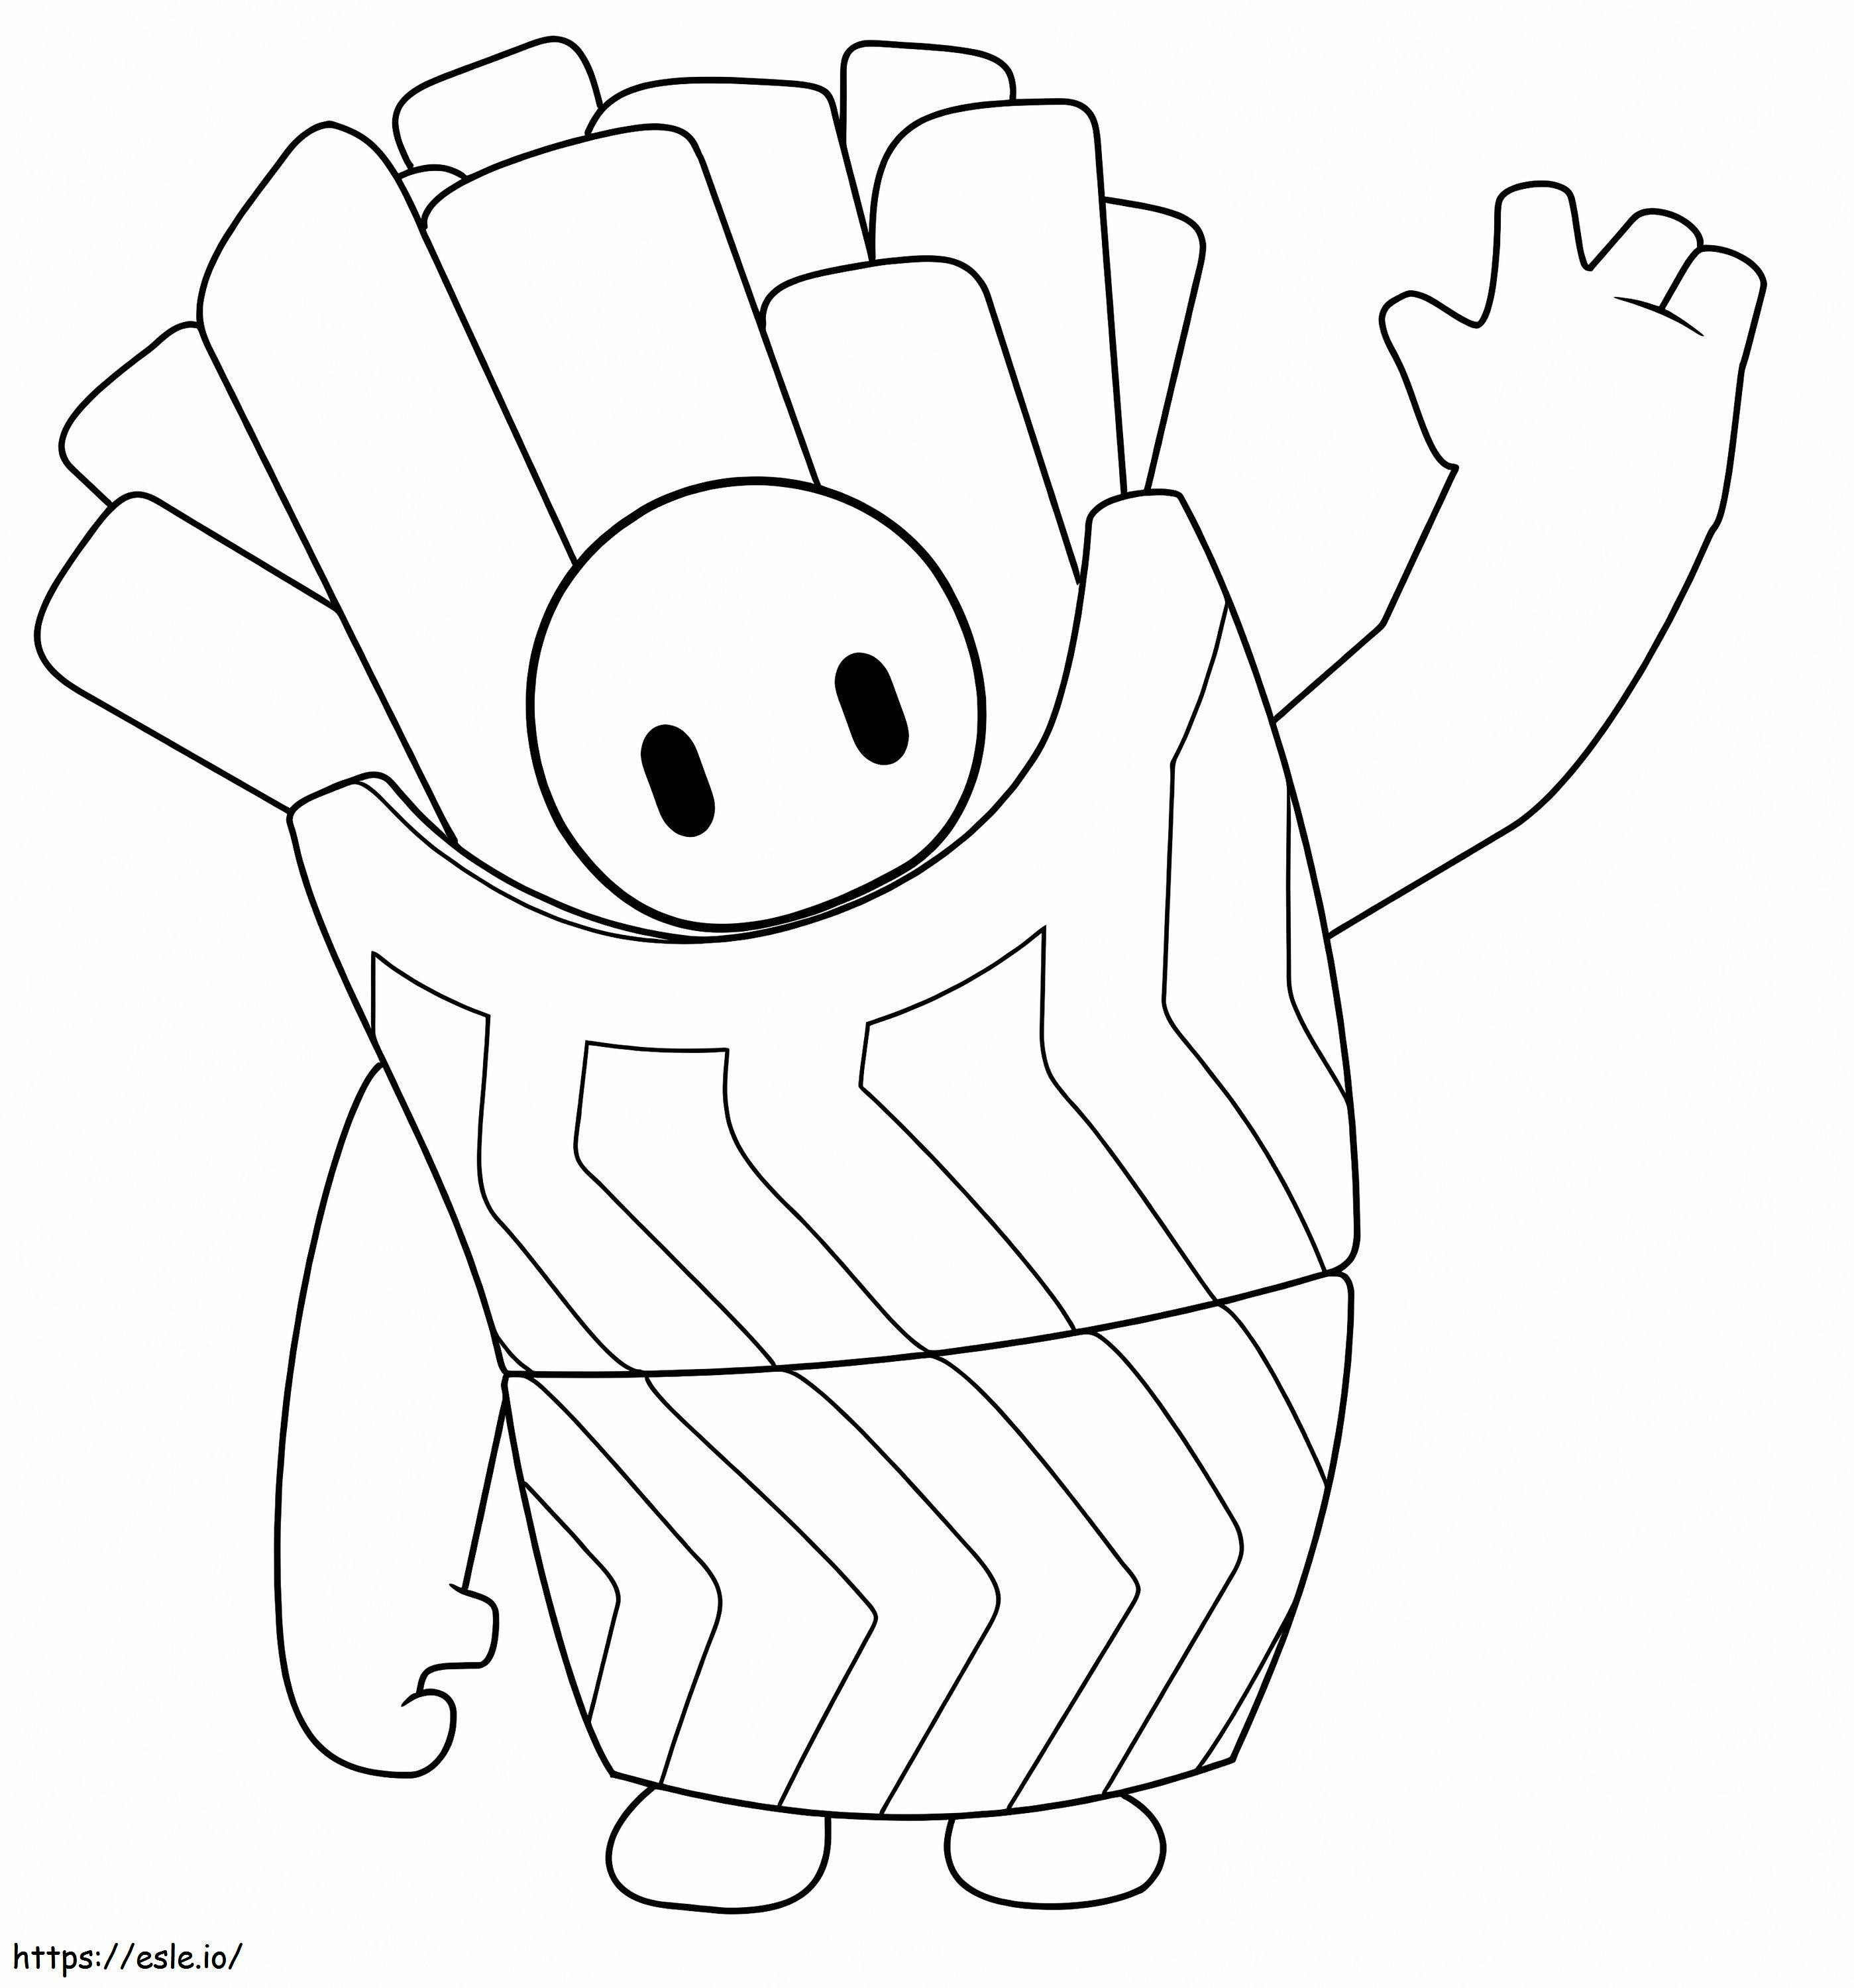 French Fries Skin Fall Guys coloring page